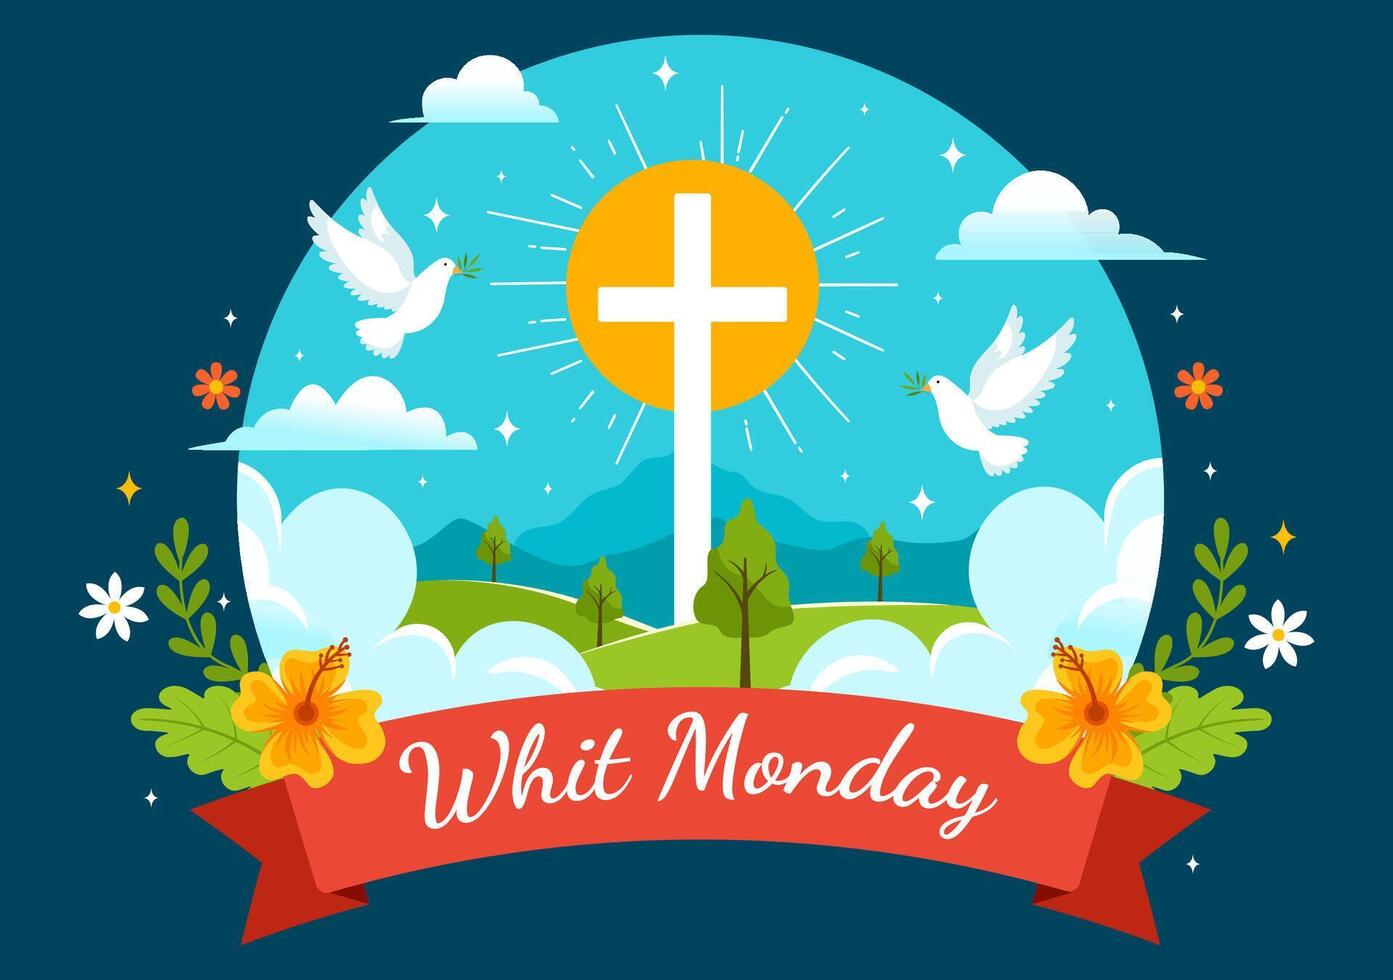 Whit Monday Vector Illustration with a Pigeon or Dove for Christian Community Holiday of the Holy Spirit in Flat Cartoon Background Design